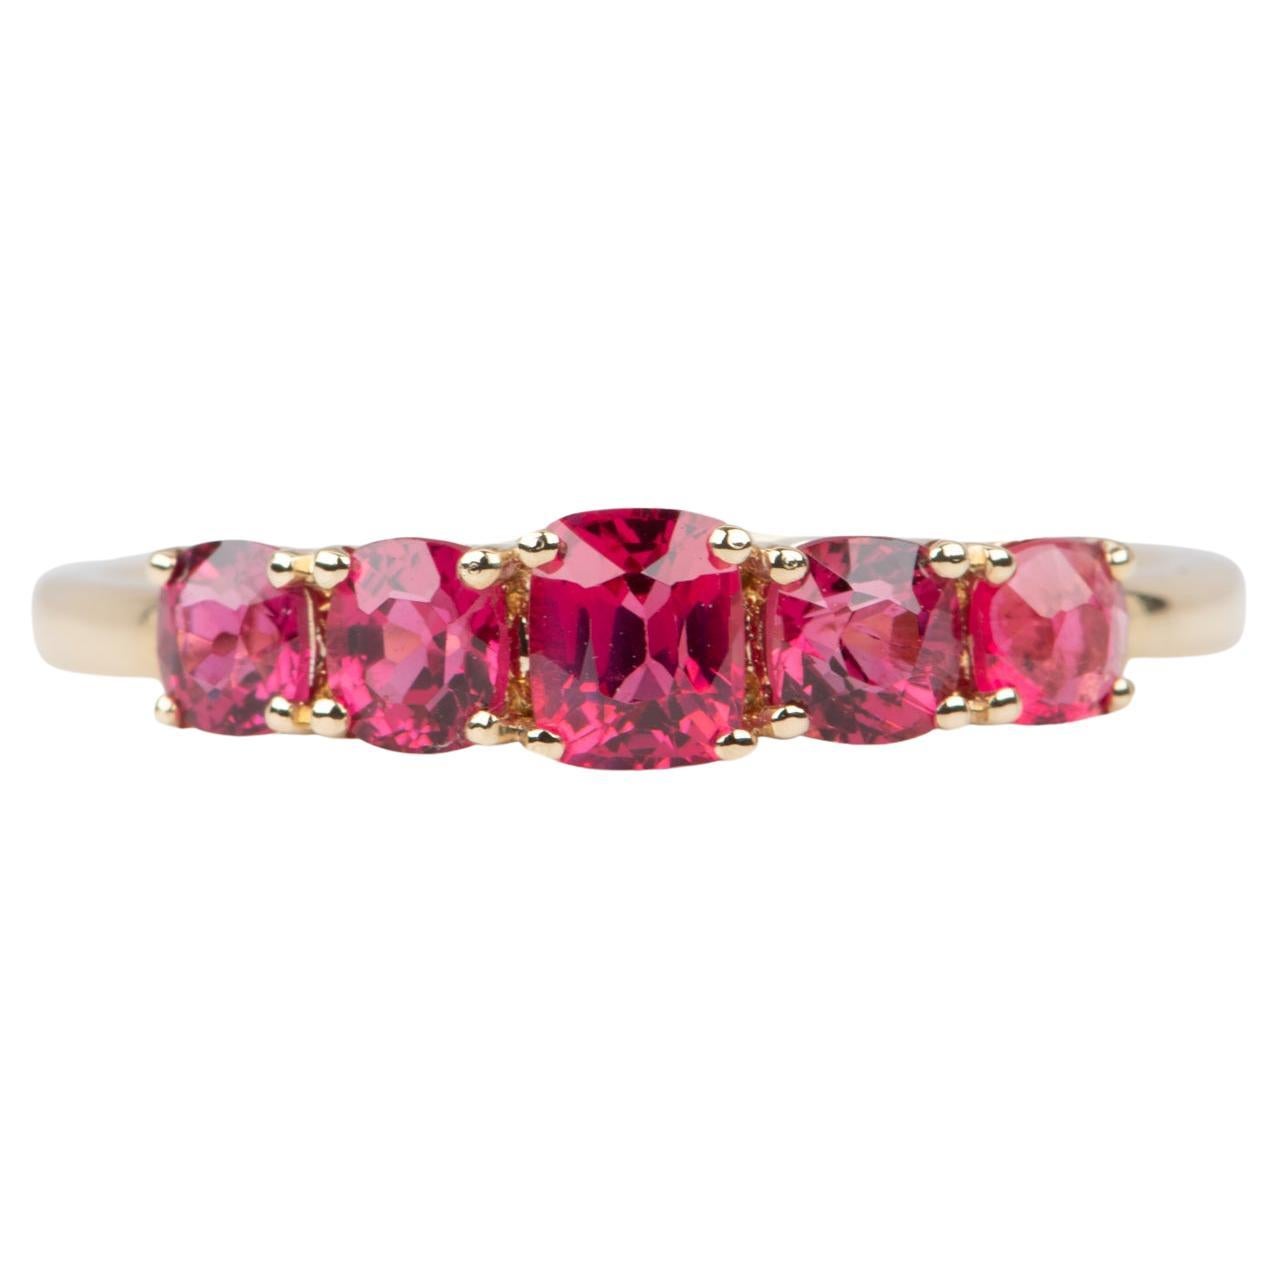 Bright Red Hot Pink Spinel Stacking Band 14K Gold Jedi Rare to Find 